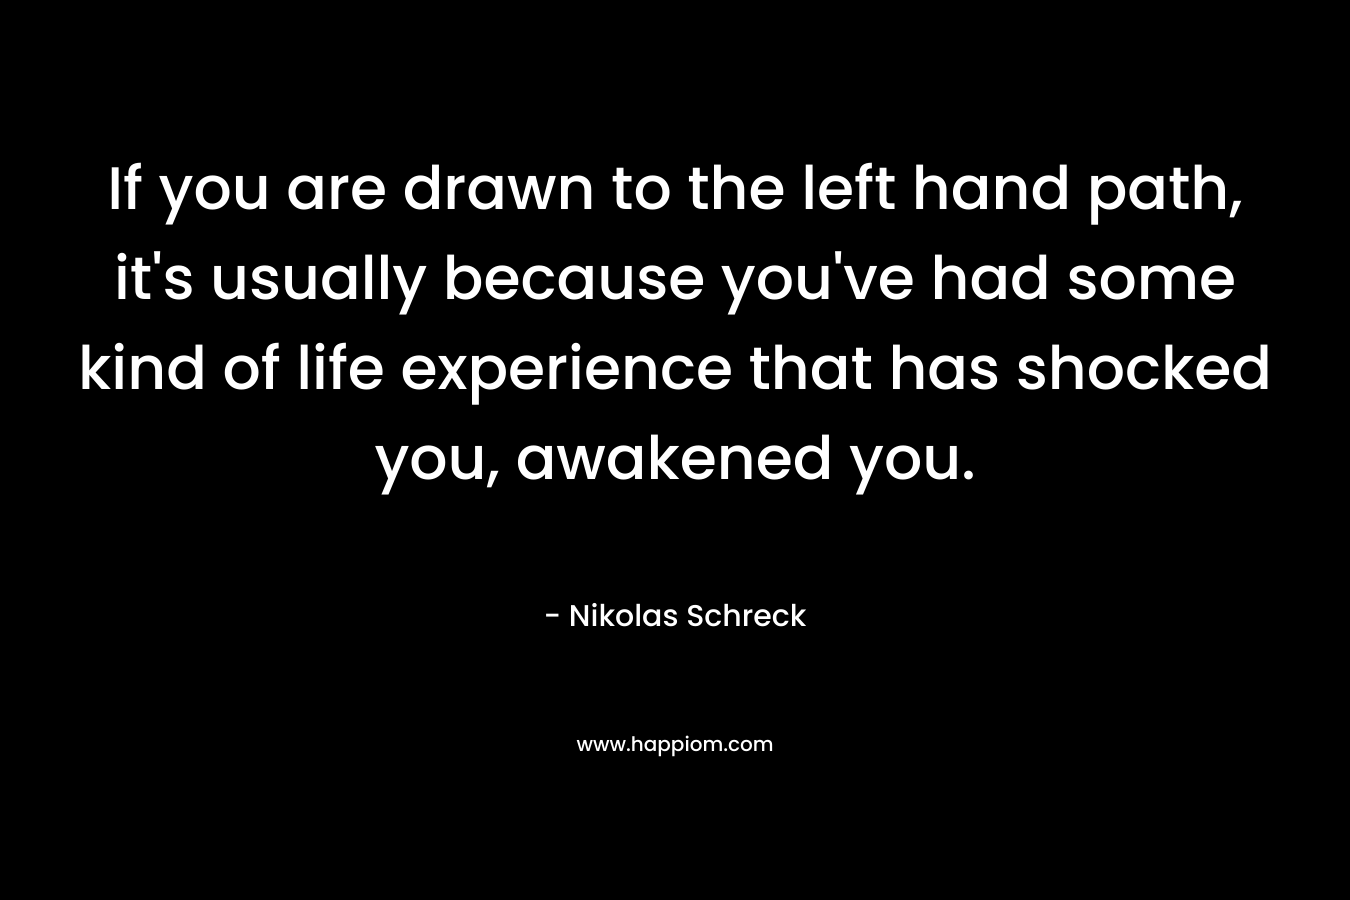 If you are drawn to the left hand path, it’s usually because you’ve had some kind of life experience that has shocked you, awakened you. – Nikolas Schreck